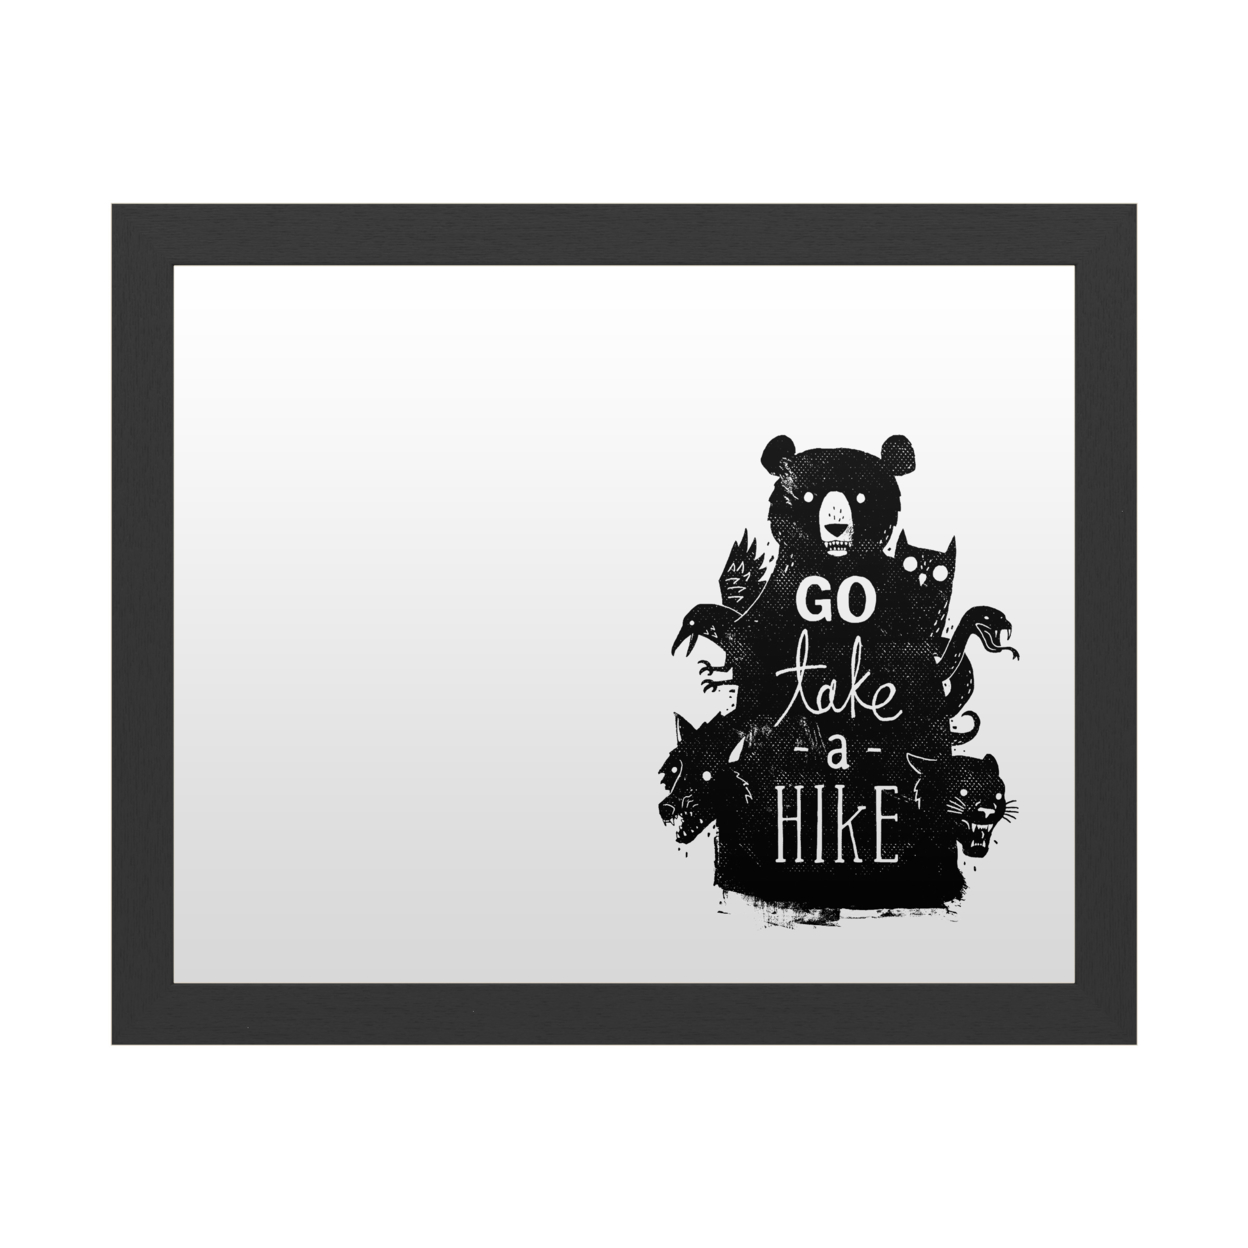 Dry Erase 16 X 20 Marker Board With Printed Artwork - Michael Buxton Go Take A Hike White Board - Ready To Hang